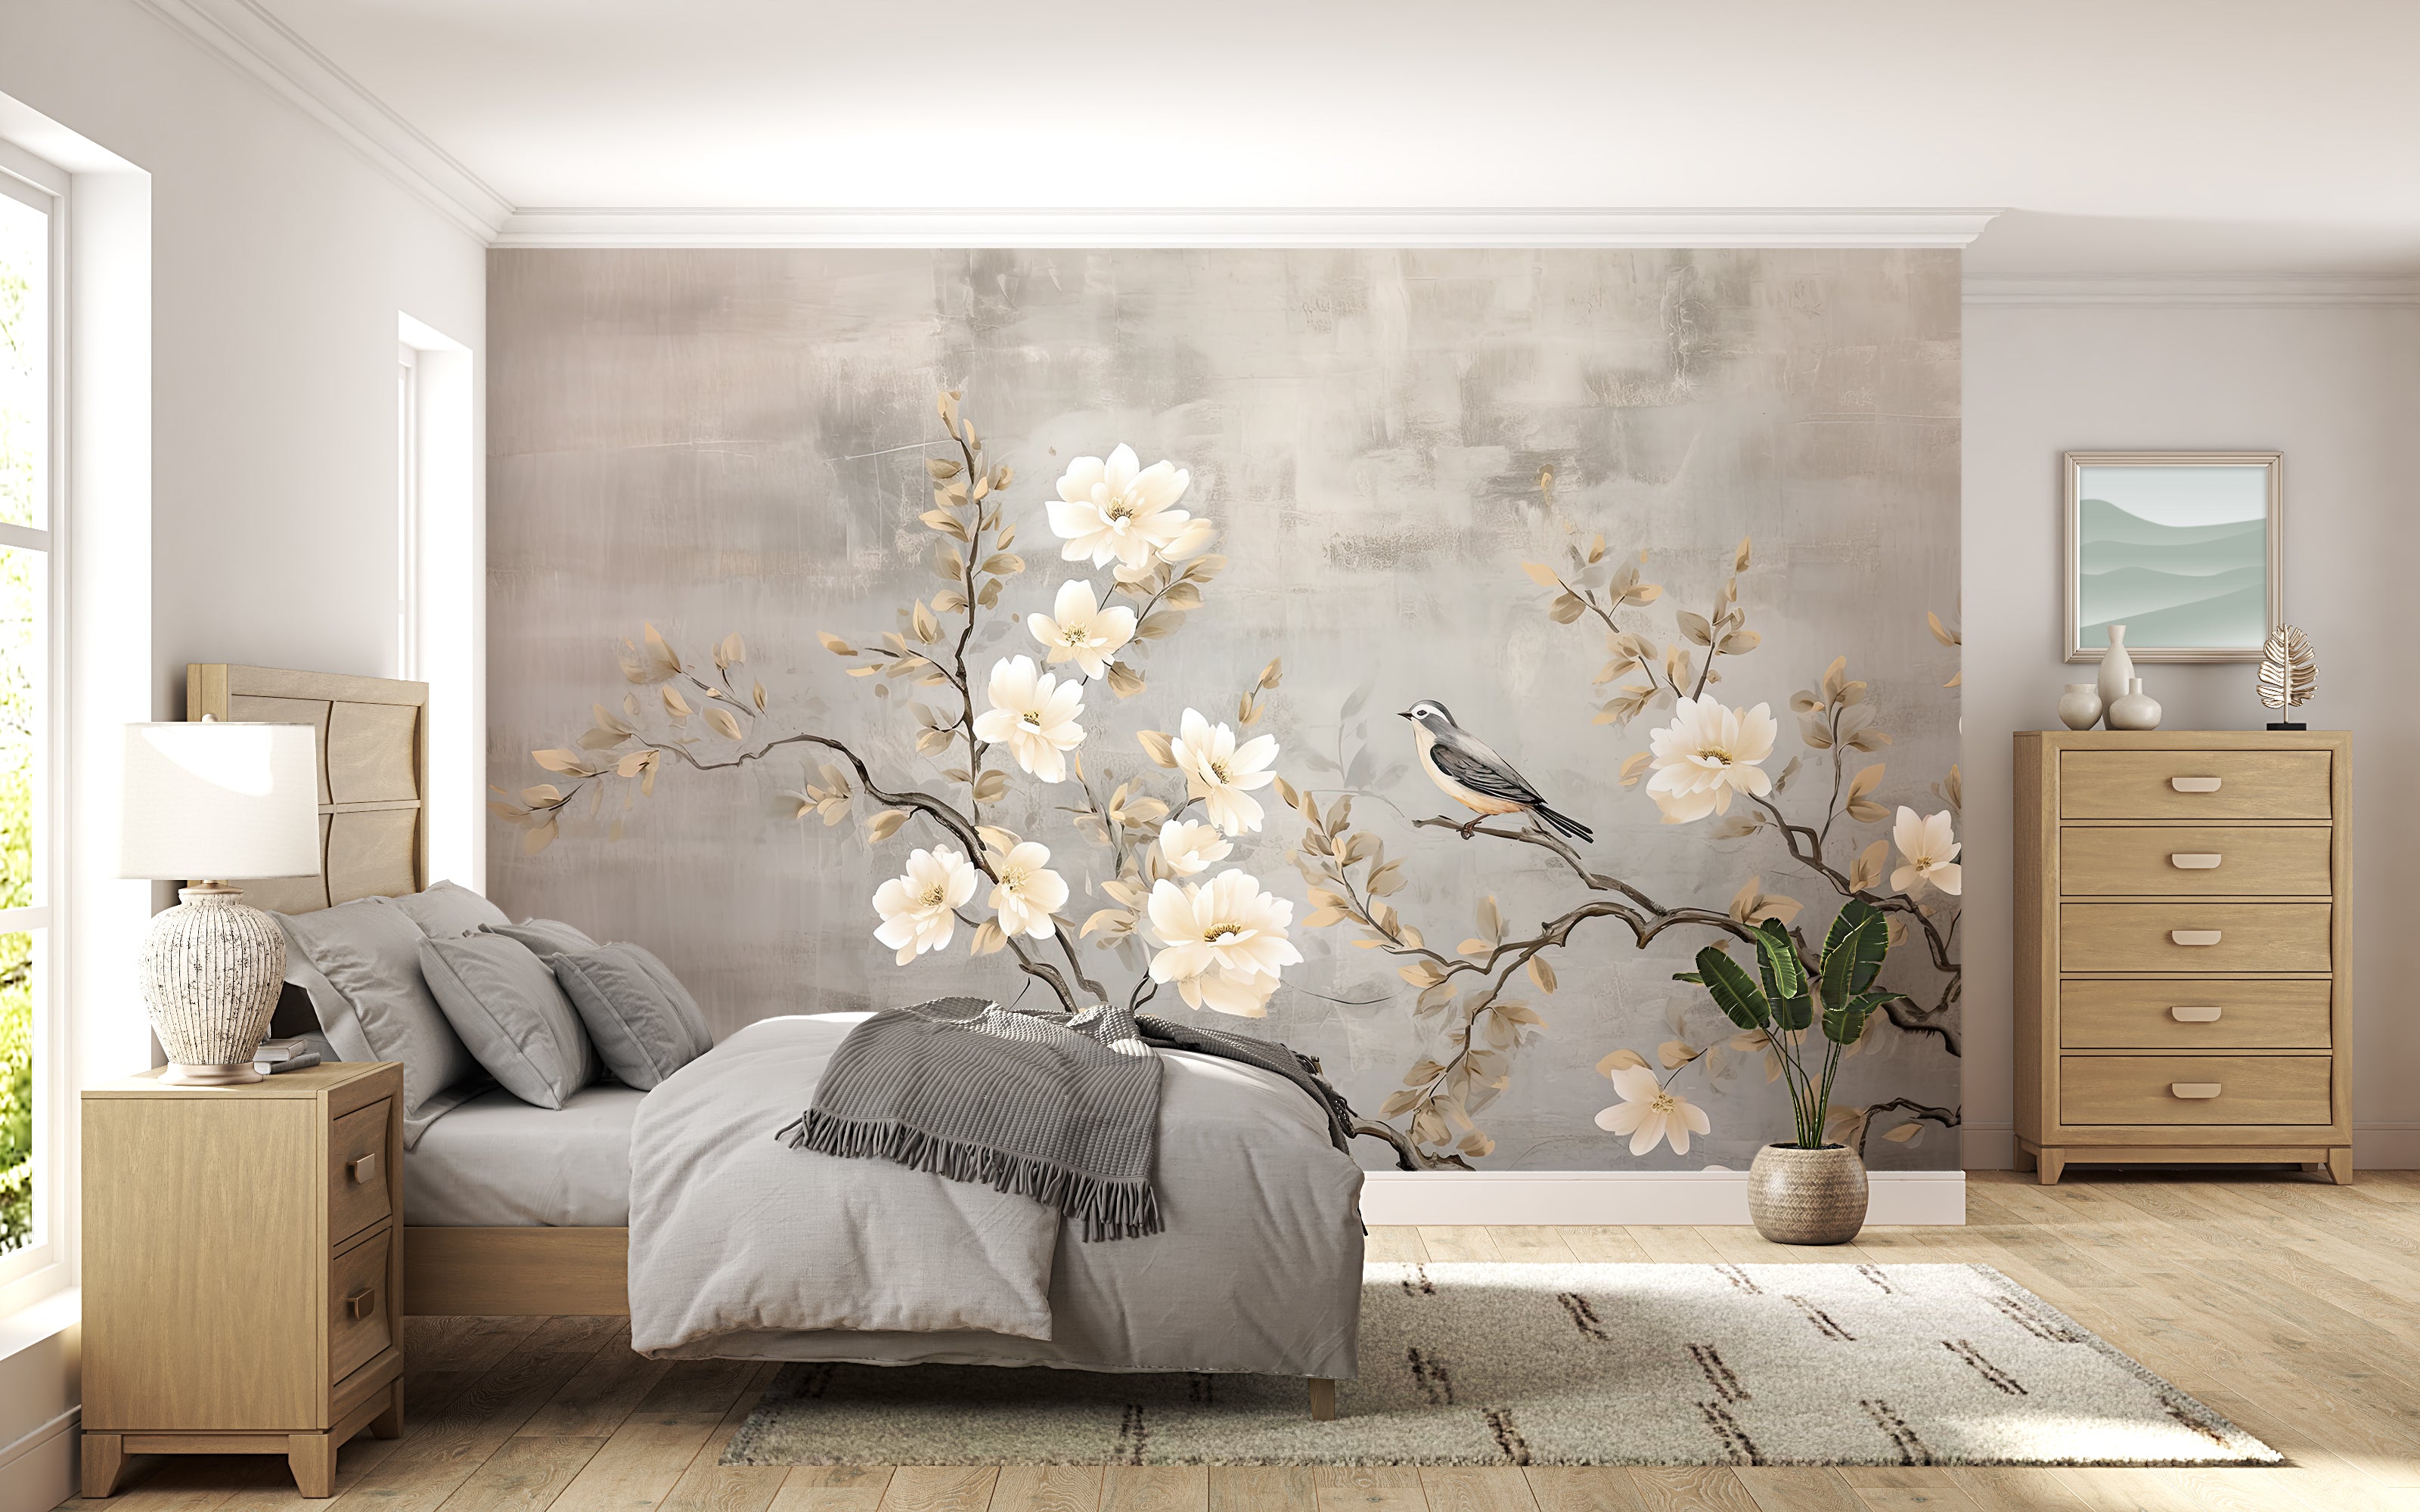 Chinoiserie - Flowering Branch and its Bird